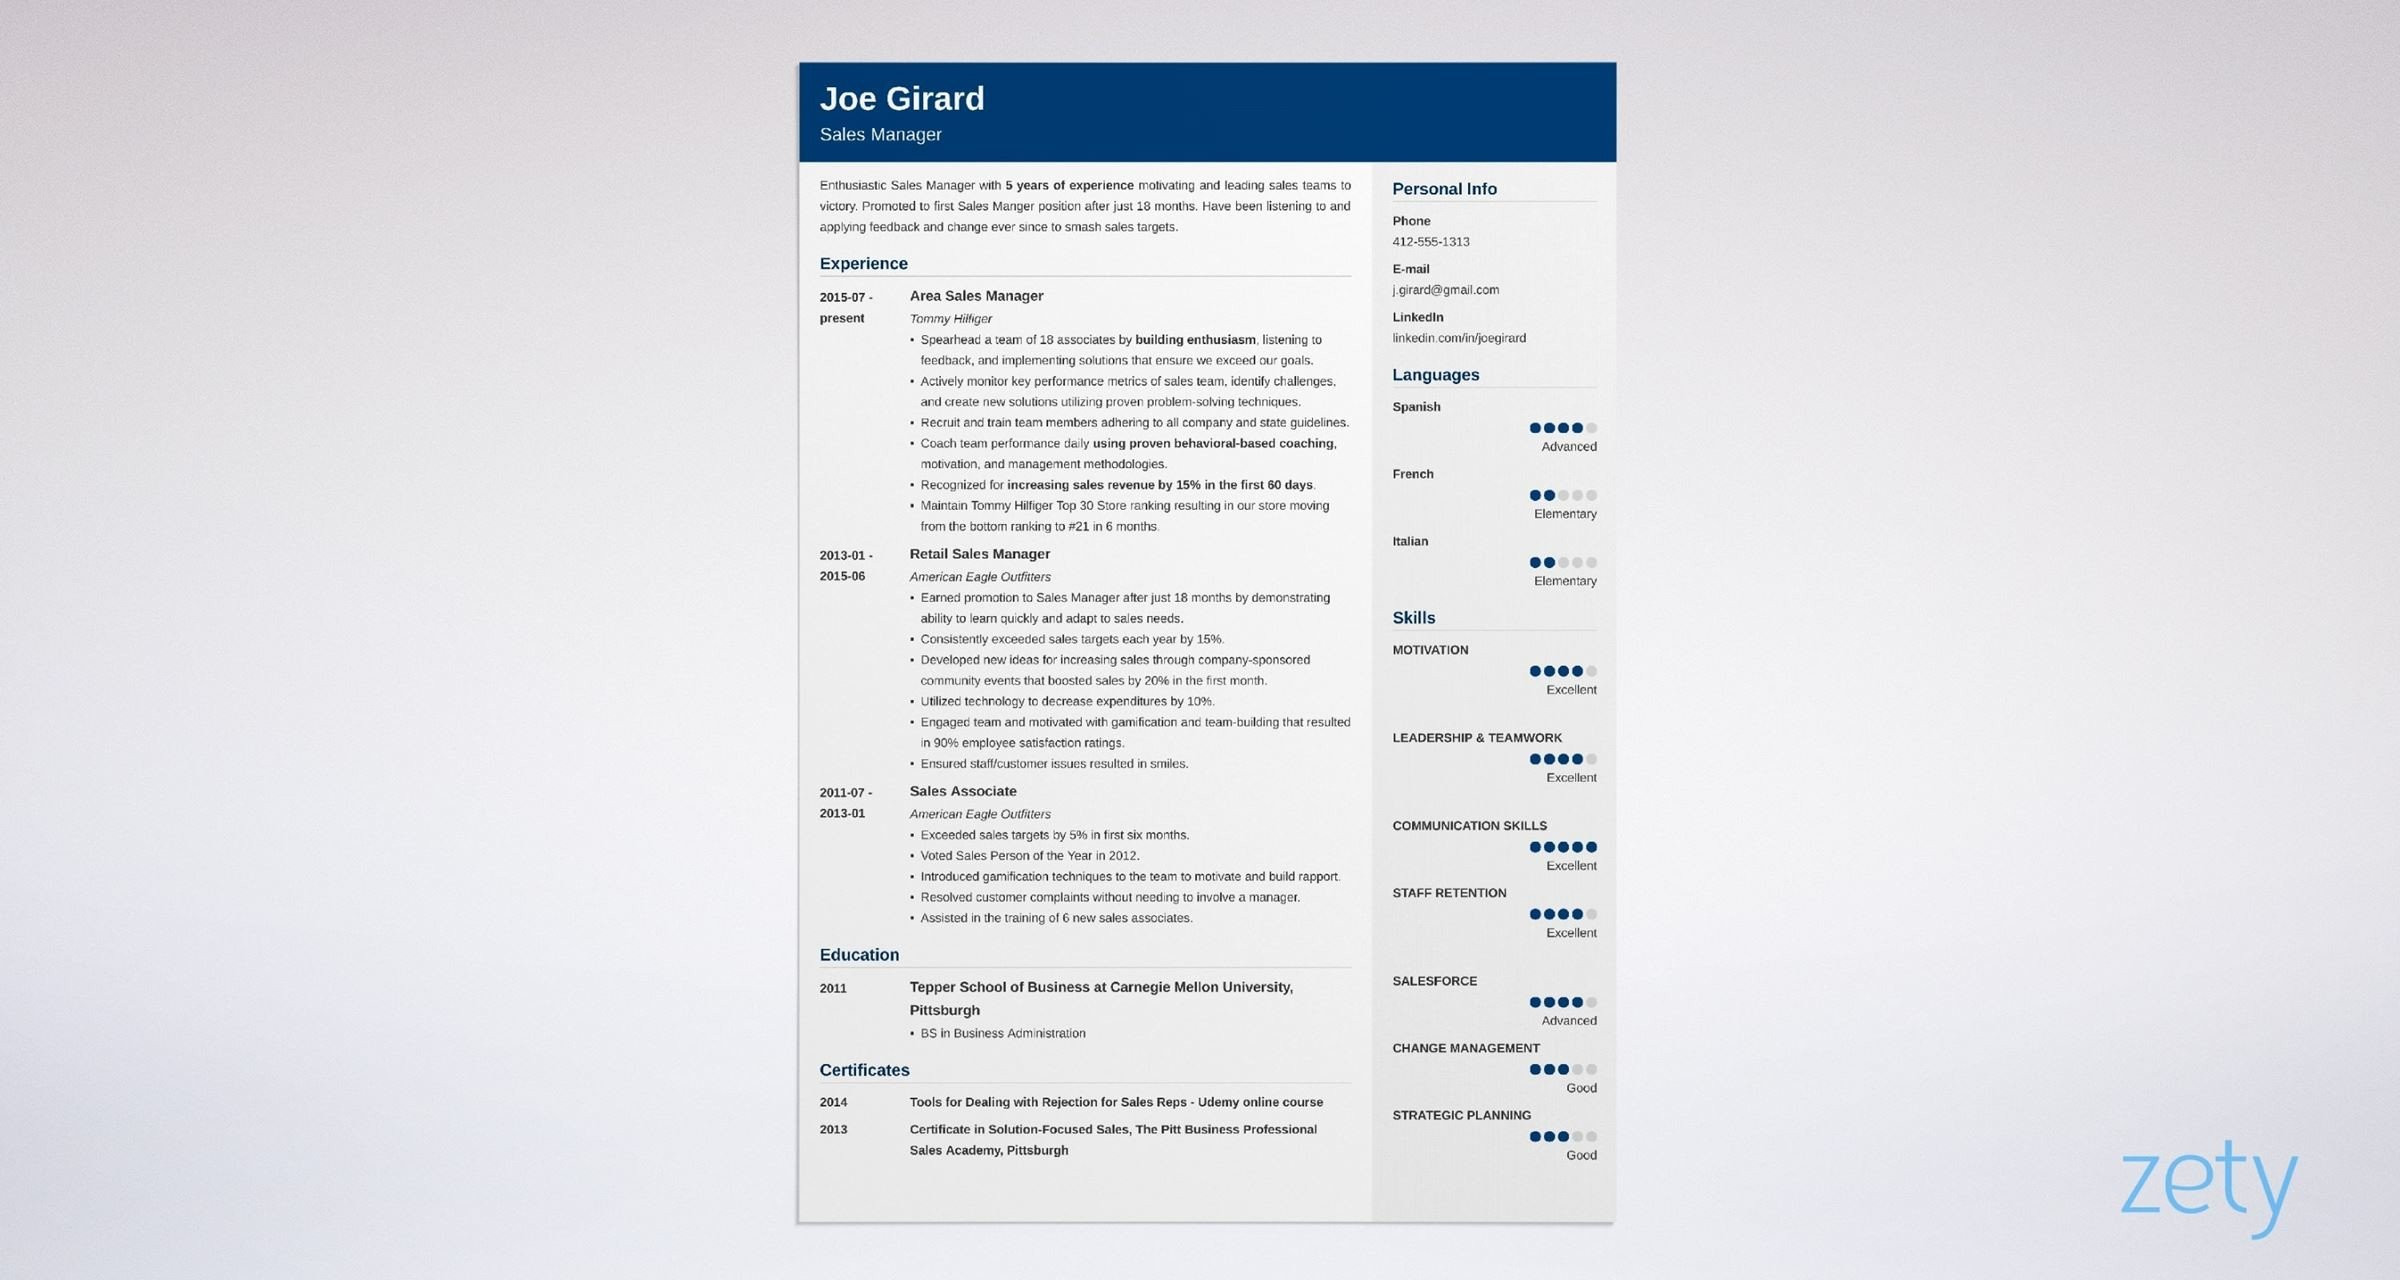 Regional Sales Manager Resume Objective Samples Sales Manager Resume Examples [templates & Key Skills]